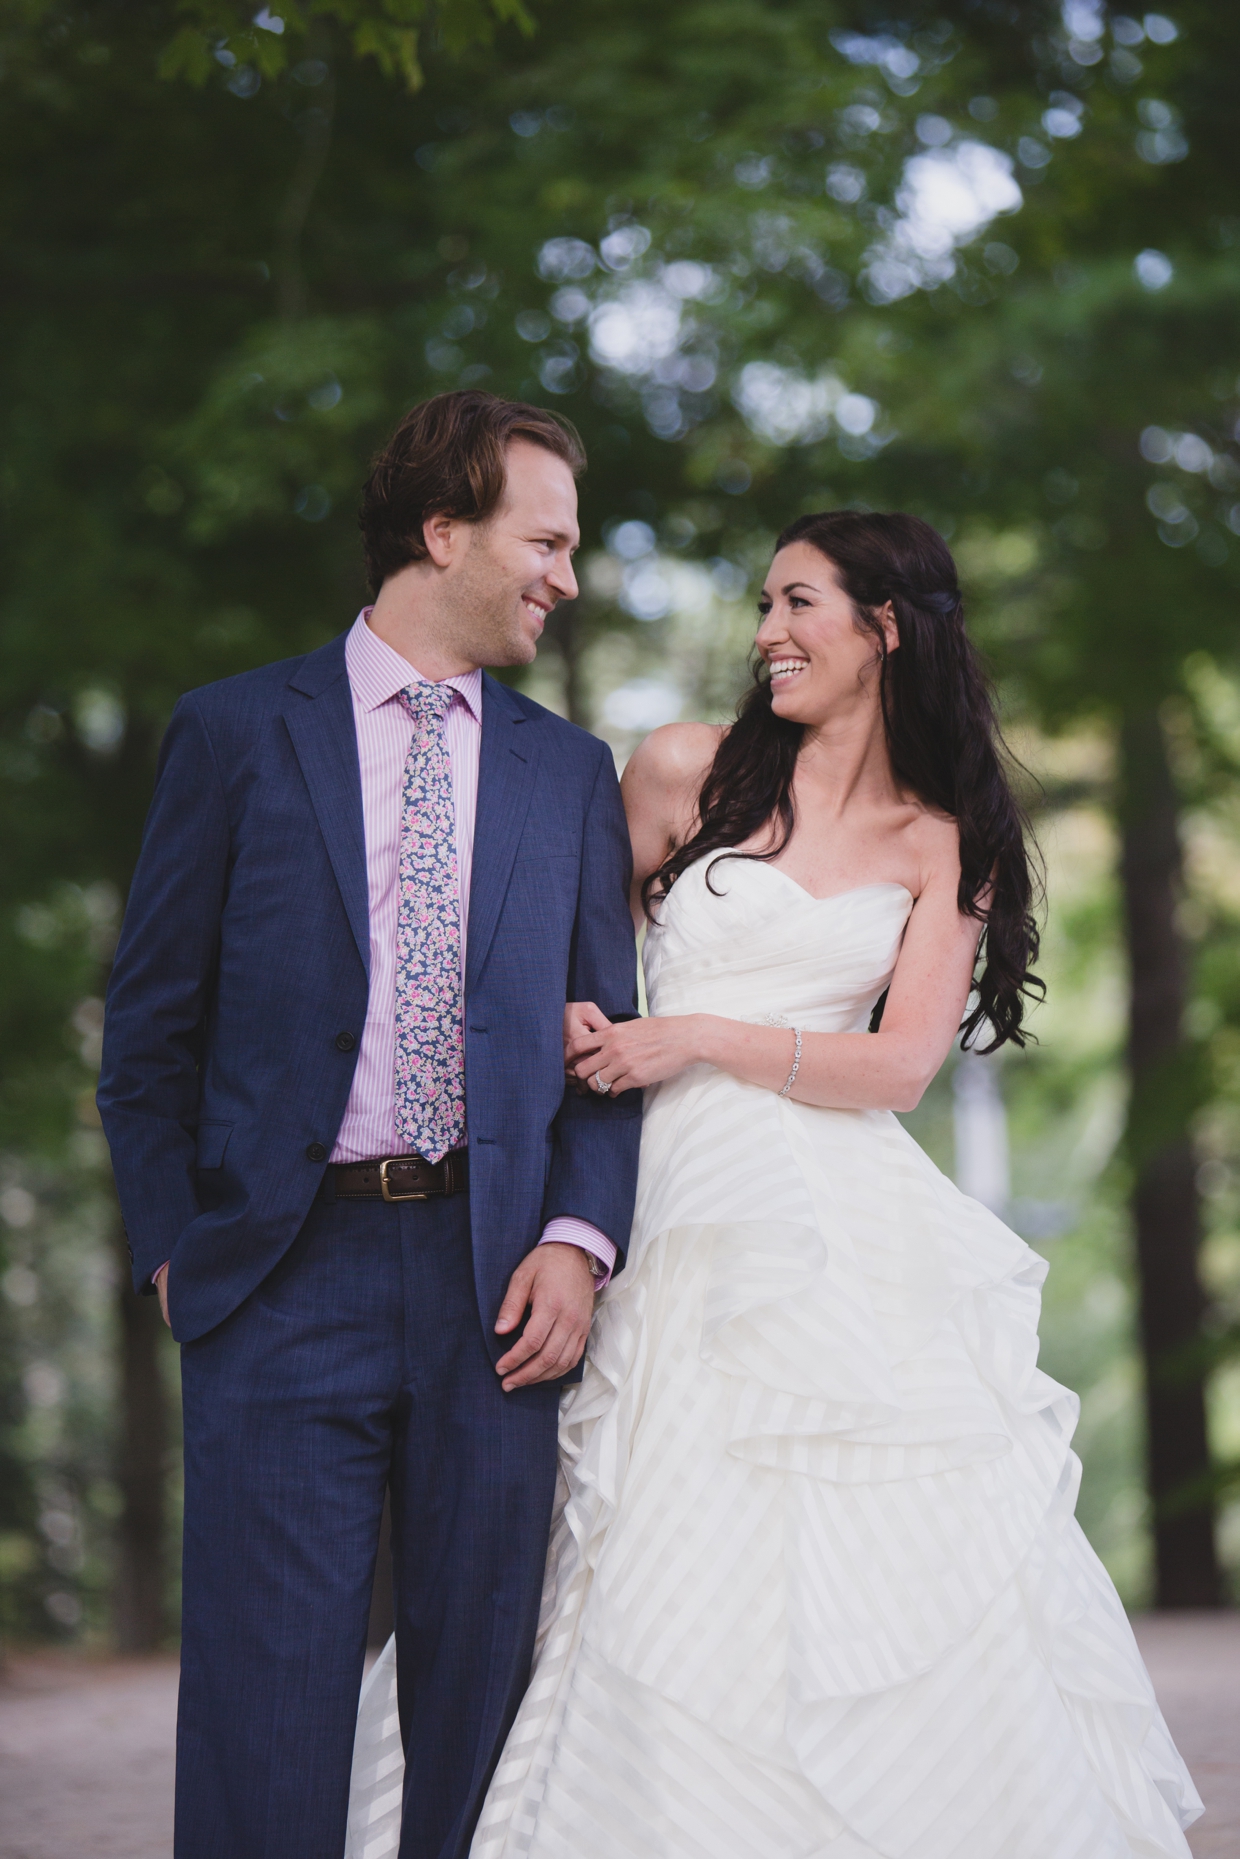 A natural and fun portrait of a bride and groom laughing as they walk through the Minute Man Park in Massachusetts